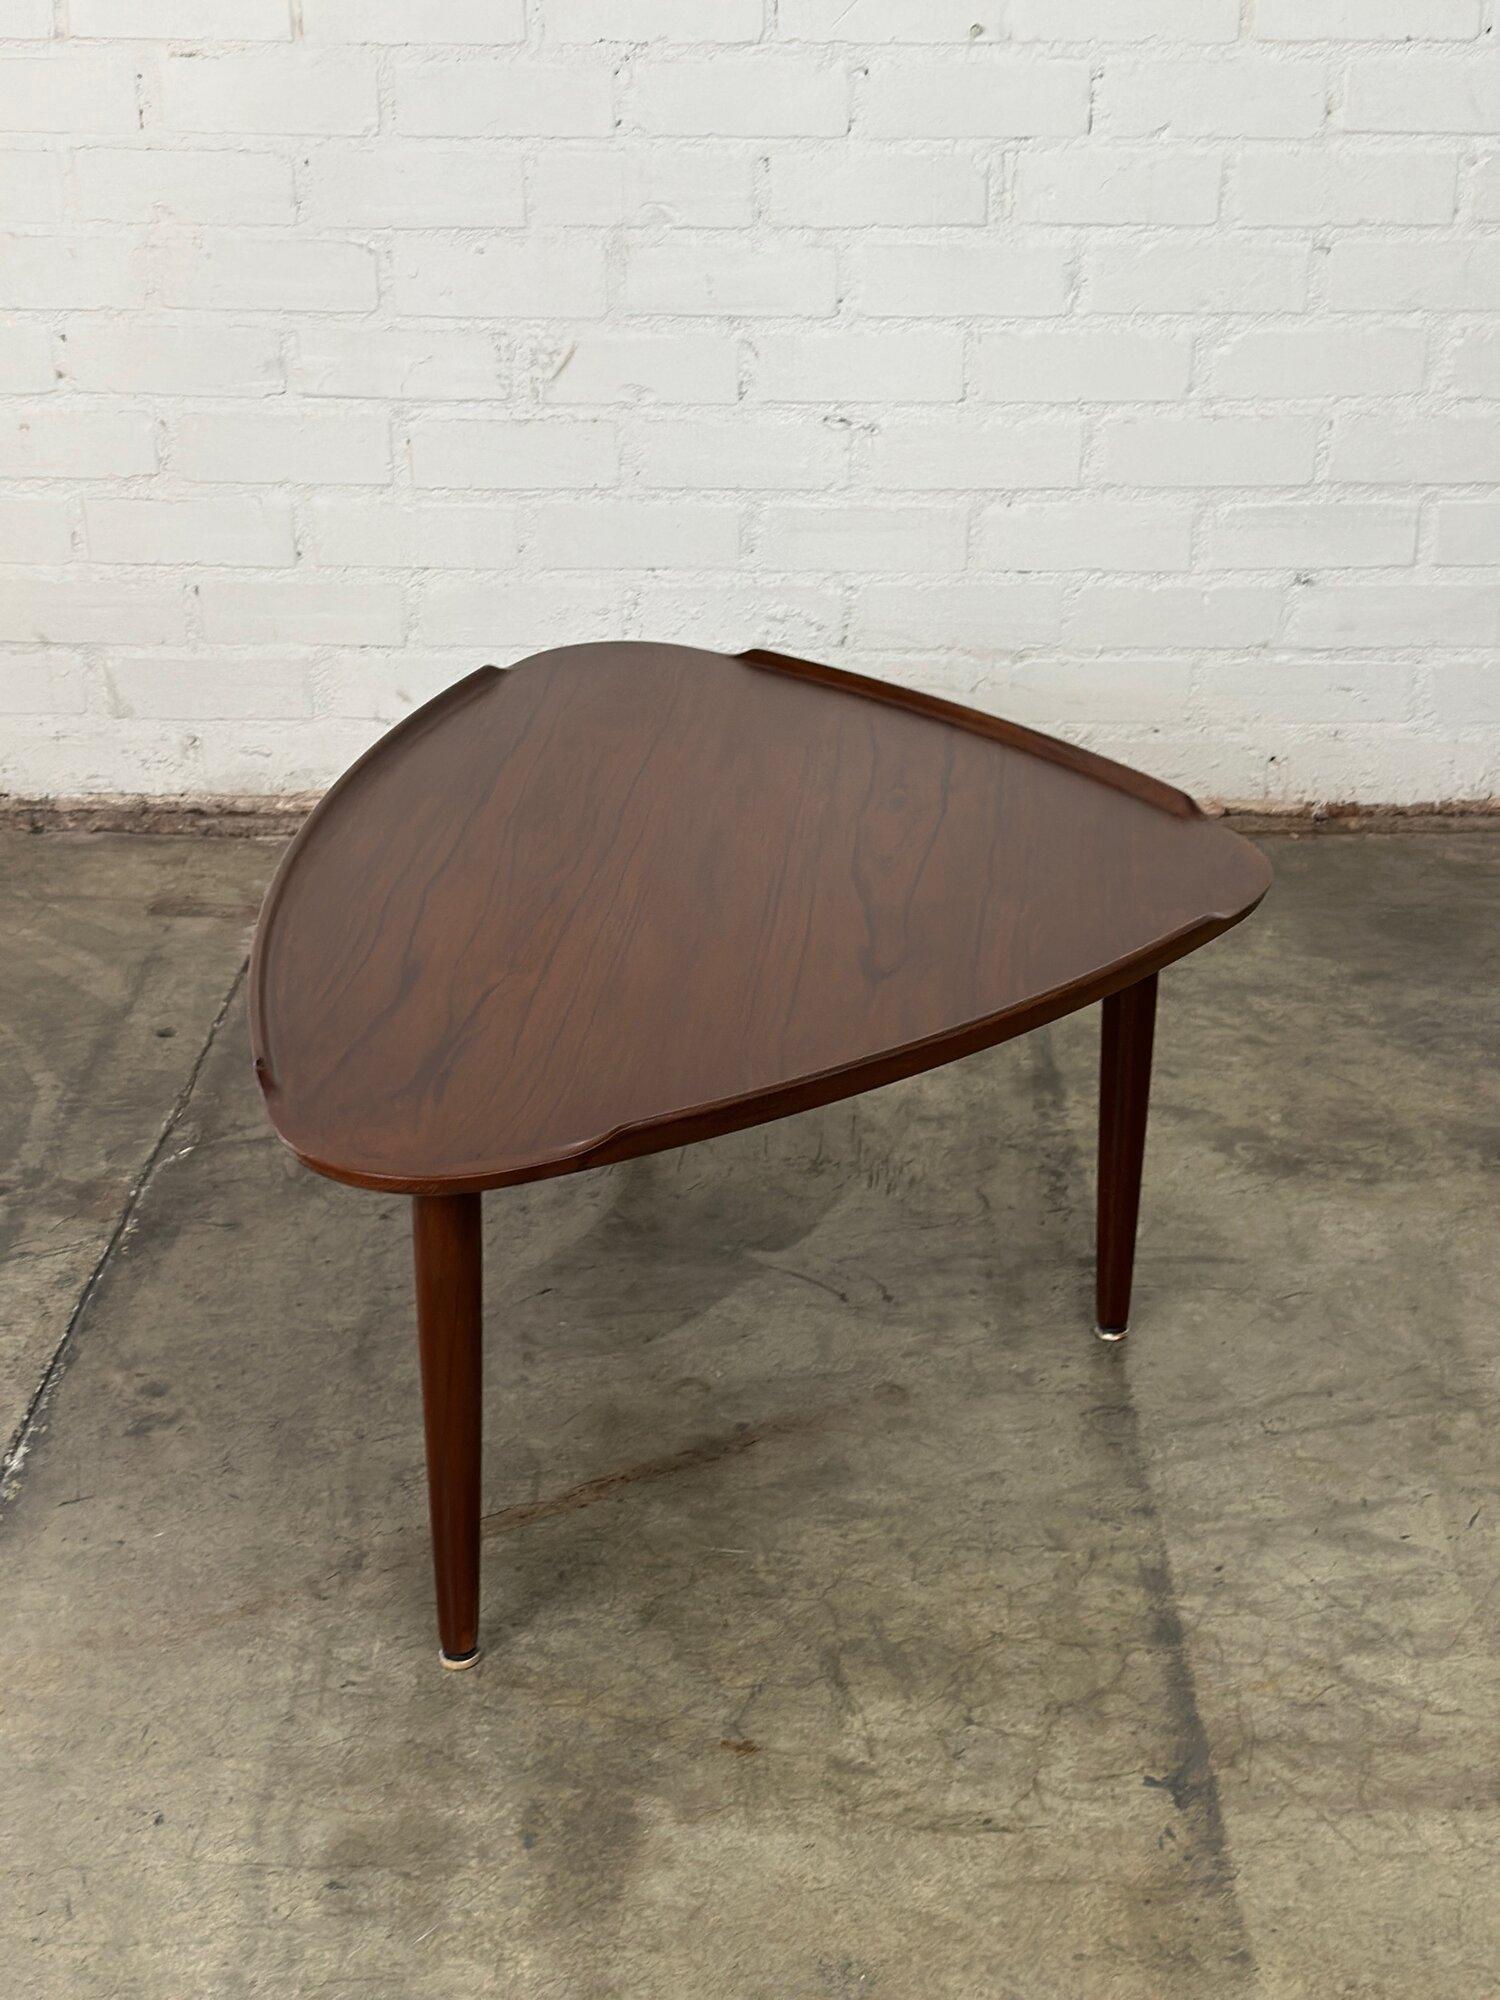 W47 D31 H18

Fully refinished 1960’s Teak Danish Modern coffee table. Table features 3 slightly tapered legs, with a rounded triangular surface with a raised lip edge.